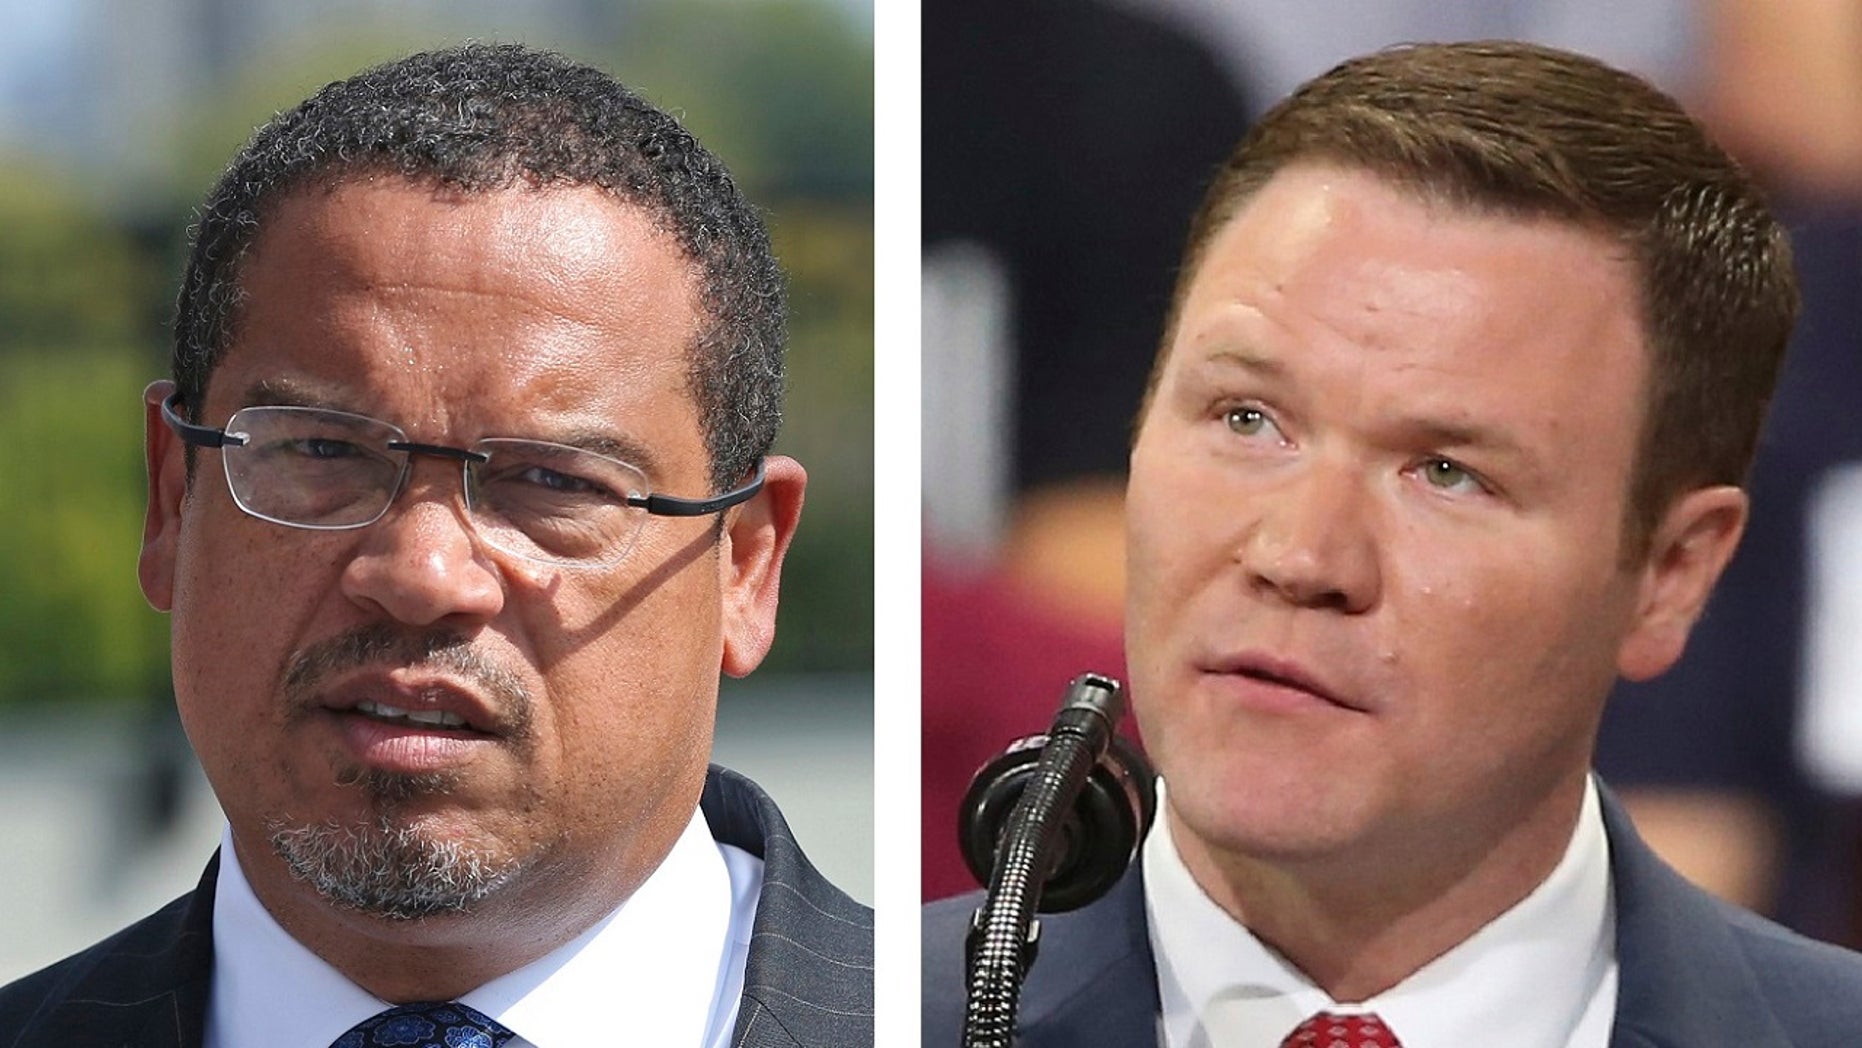 Representative Keith Ellison, D-Minn., Left, and former representative of state representative Doug Wardlow, participate in a close race for the Minnesota Attorney General.  